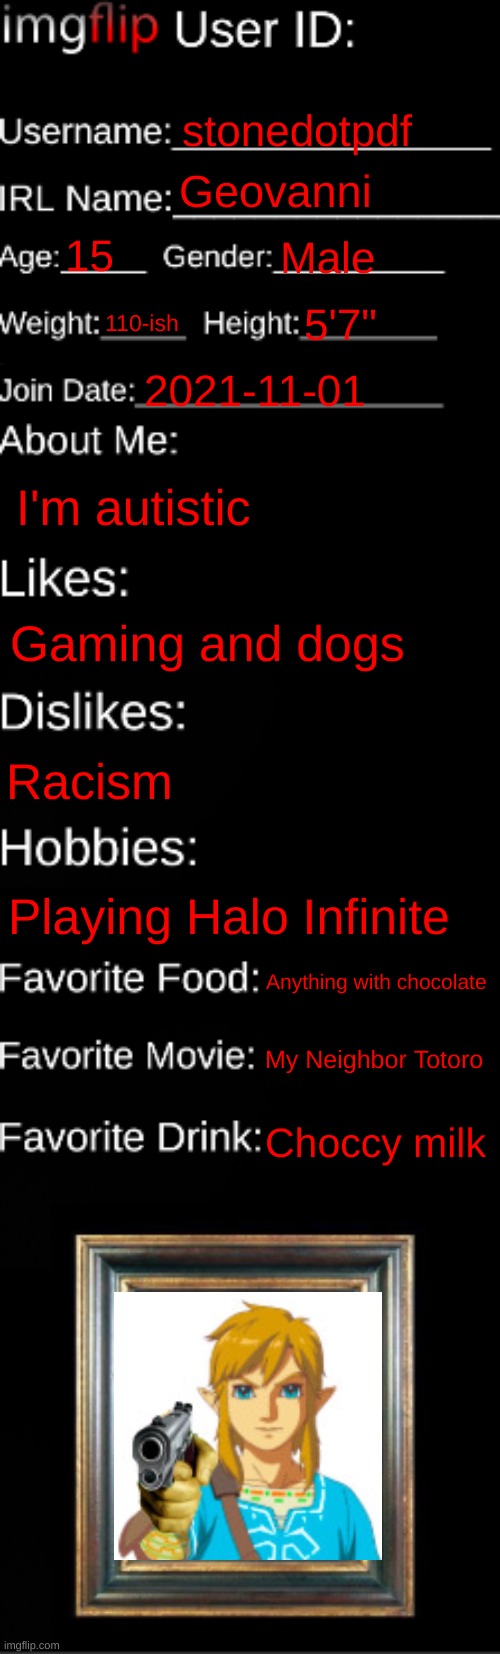 Think I'll try this out | stonedotpdf; Geovanni; 15; Male; 110-ish; 5'7"; 2021-11-01; I'm autistic; Gaming and dogs; Racism; Playing Halo Infinite; Anything with chocolate; My Neighbor Totoro; Choccy milk | image tagged in imgflip id card | made w/ Imgflip meme maker